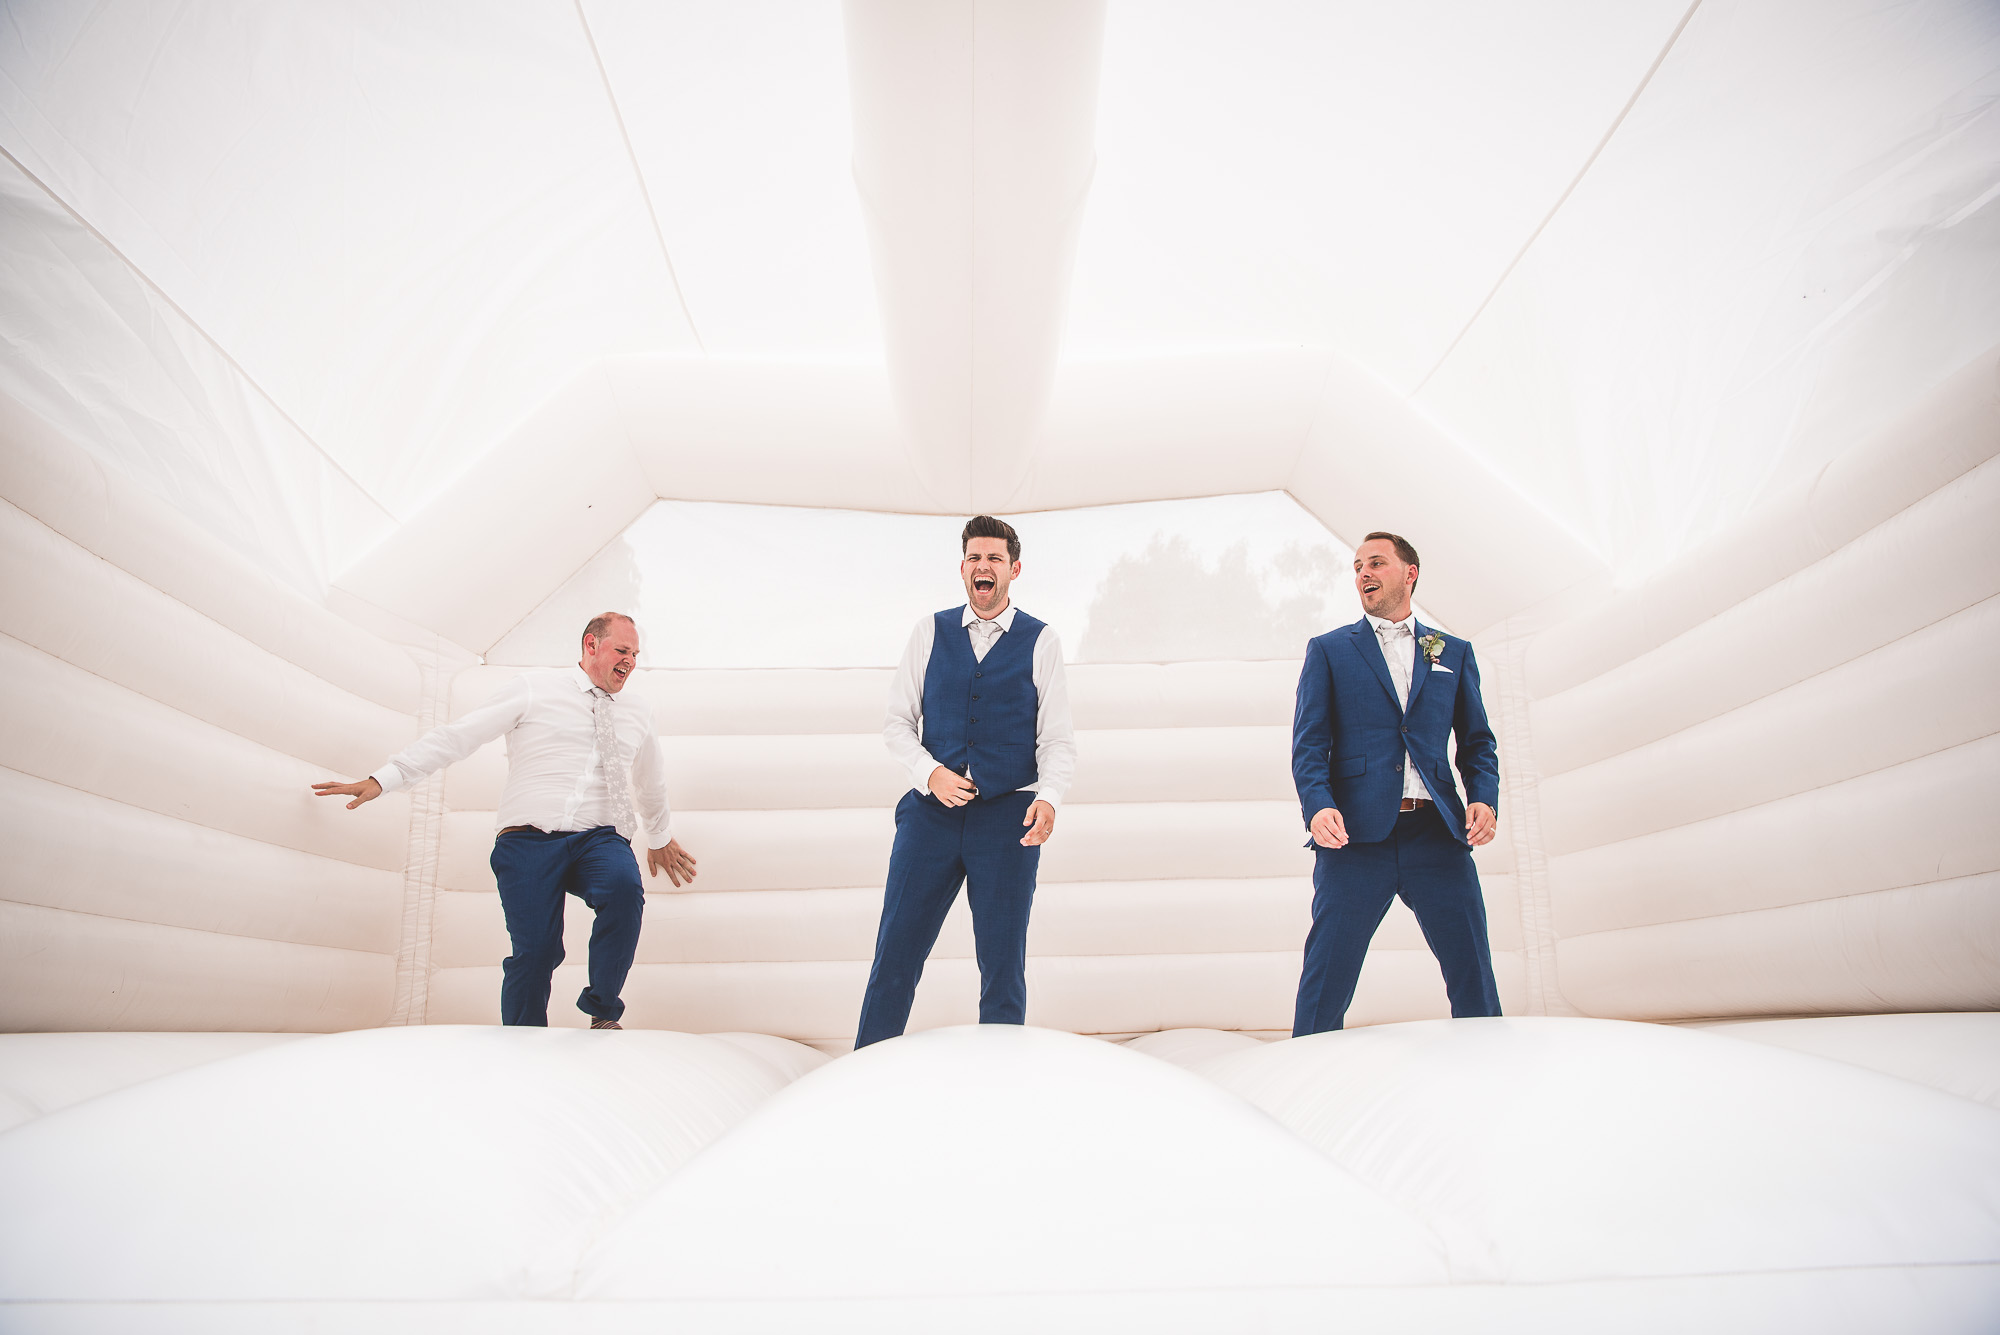 A bride's wedding photo featuring three groomsmen on an inflatable bouncy castle, captured by a wedding photographer.